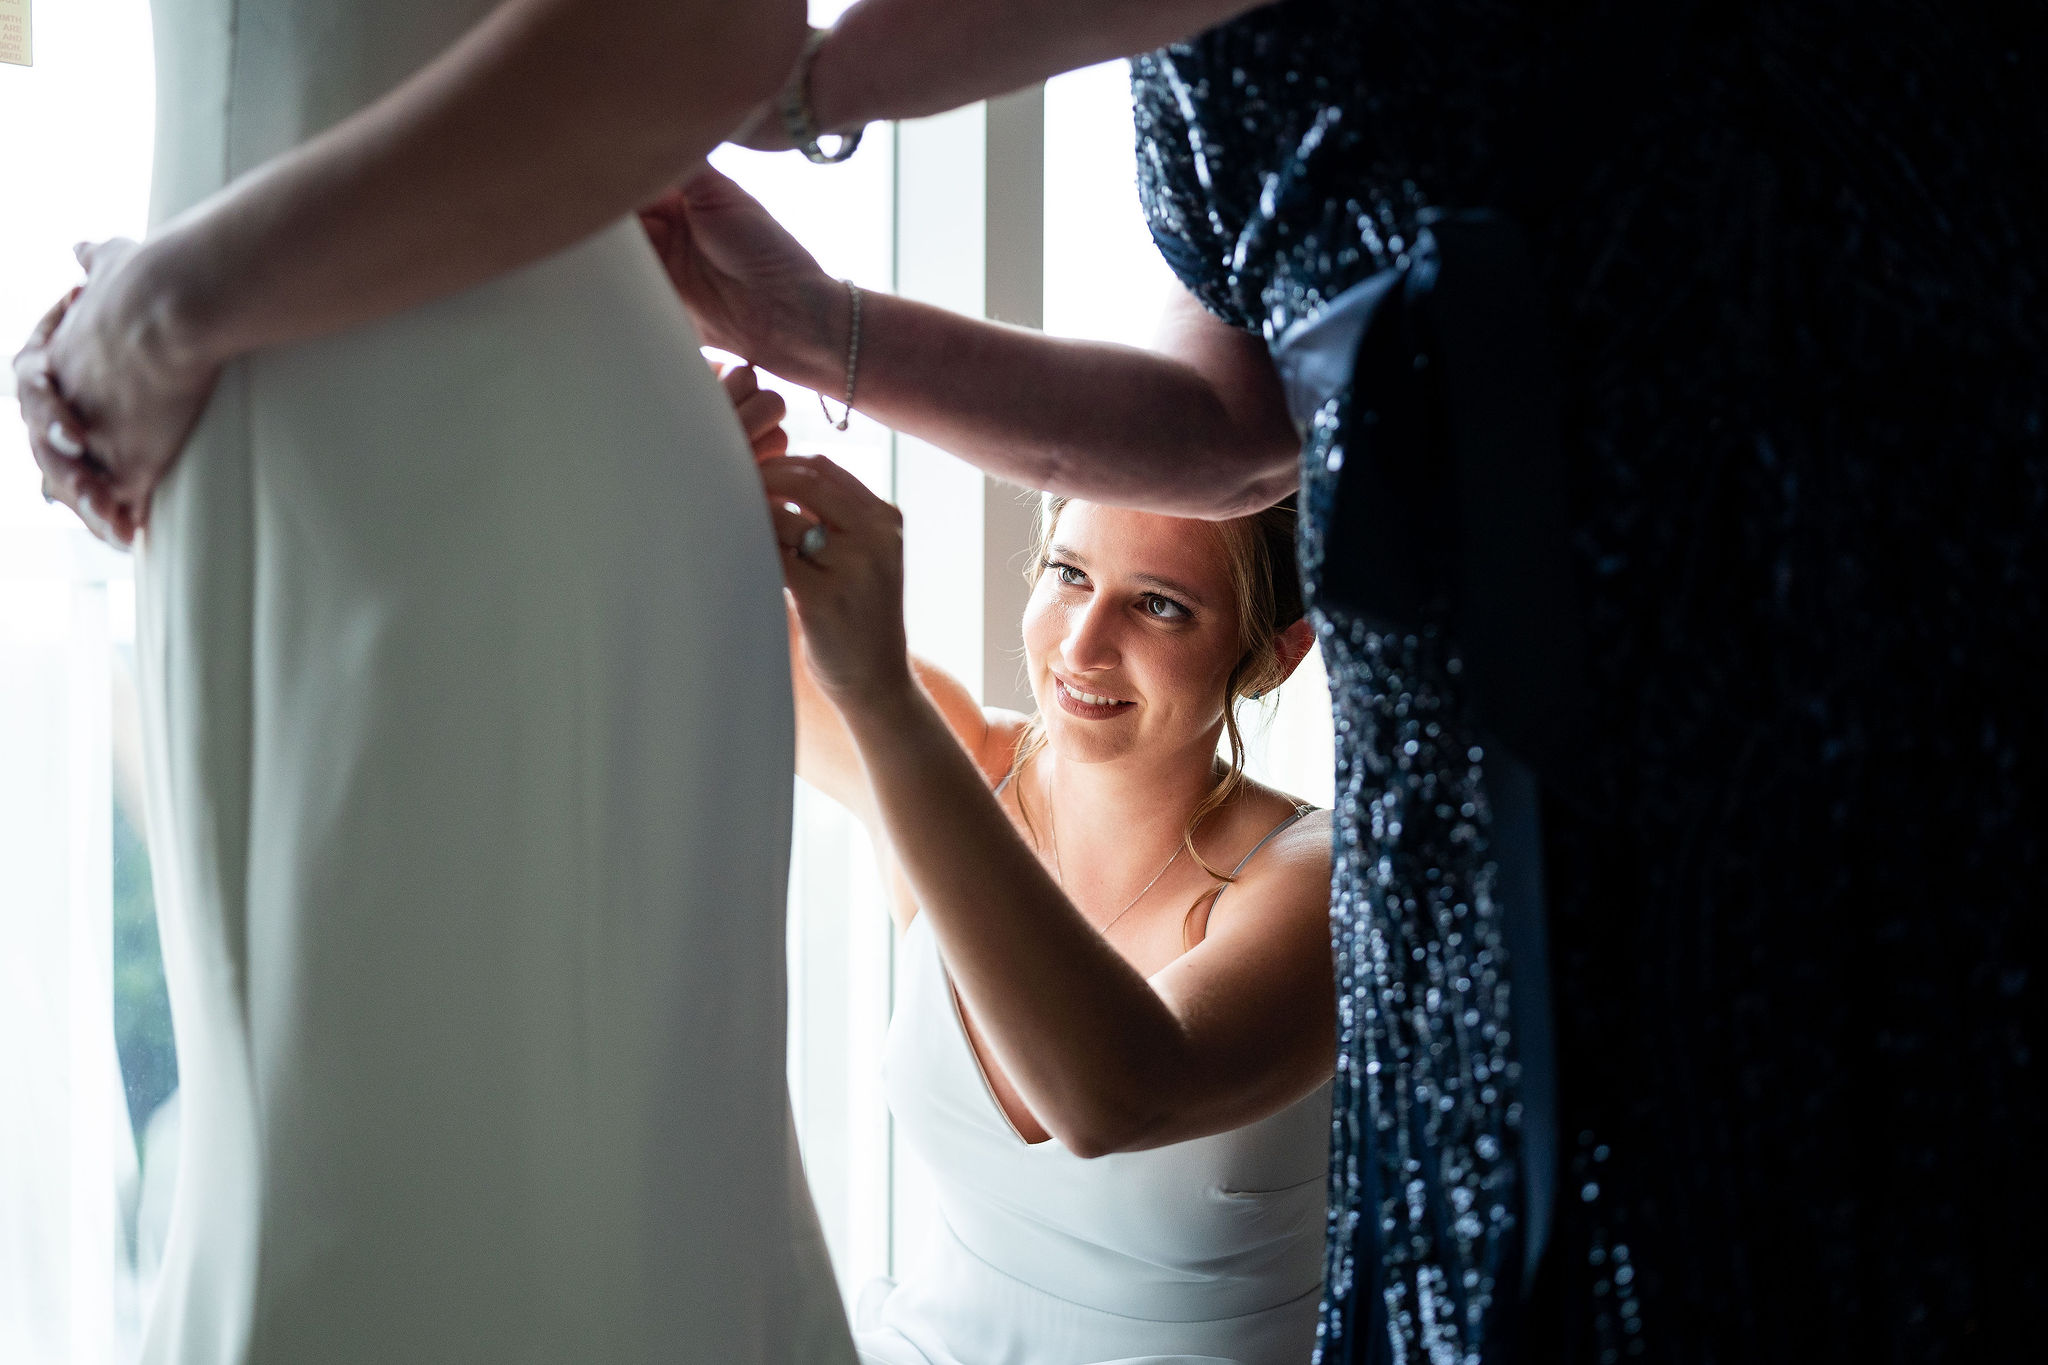 maid of honor helping bride with dress